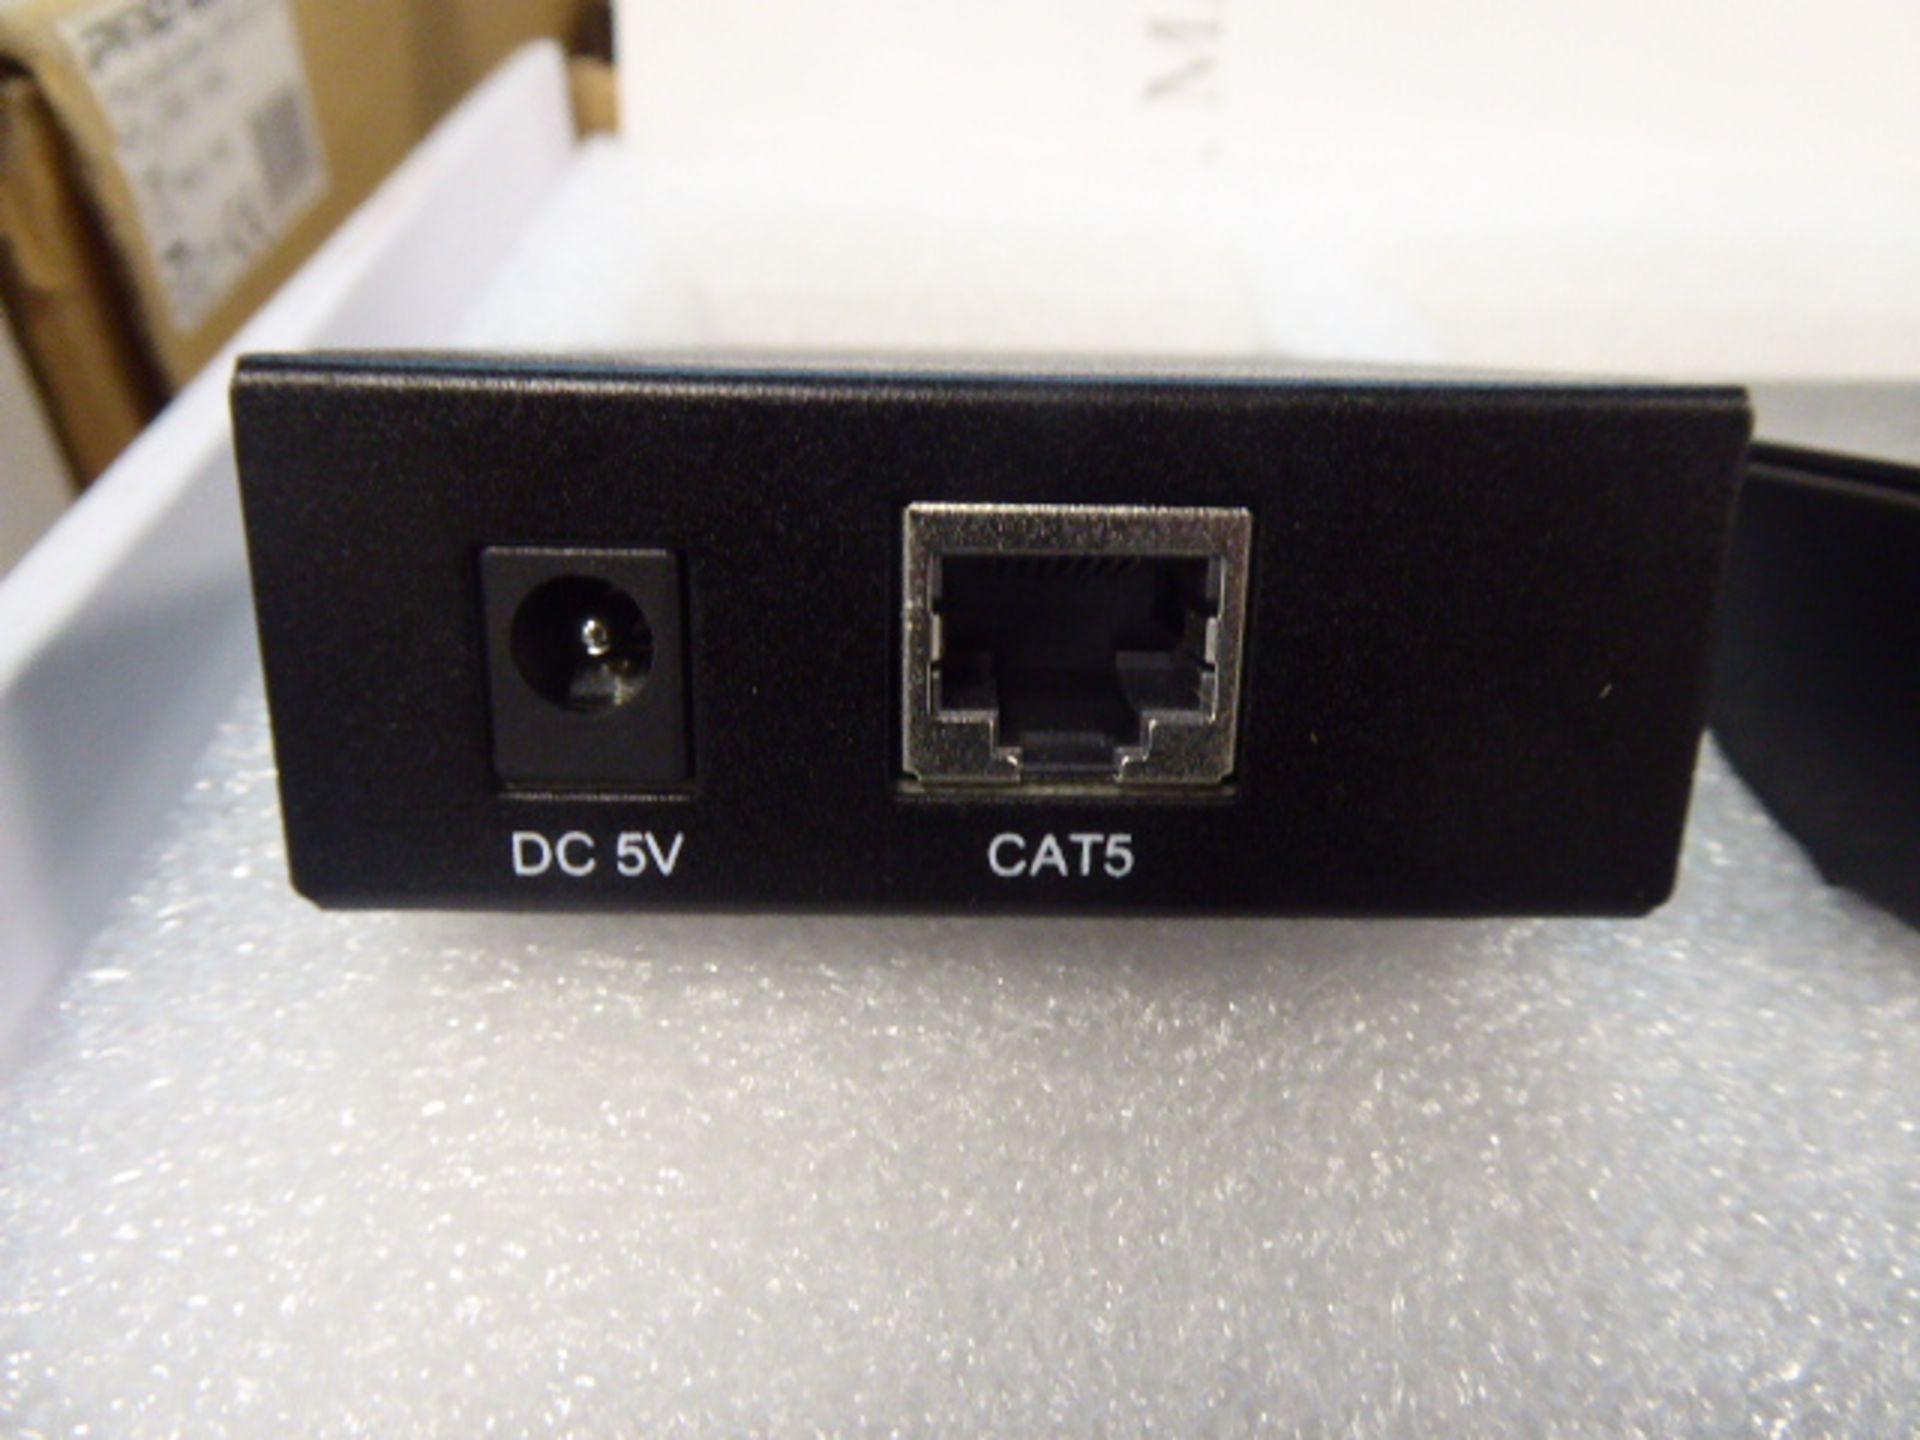 HDMI extender Cat 5E kit with power adapters and box - Image 2 of 4